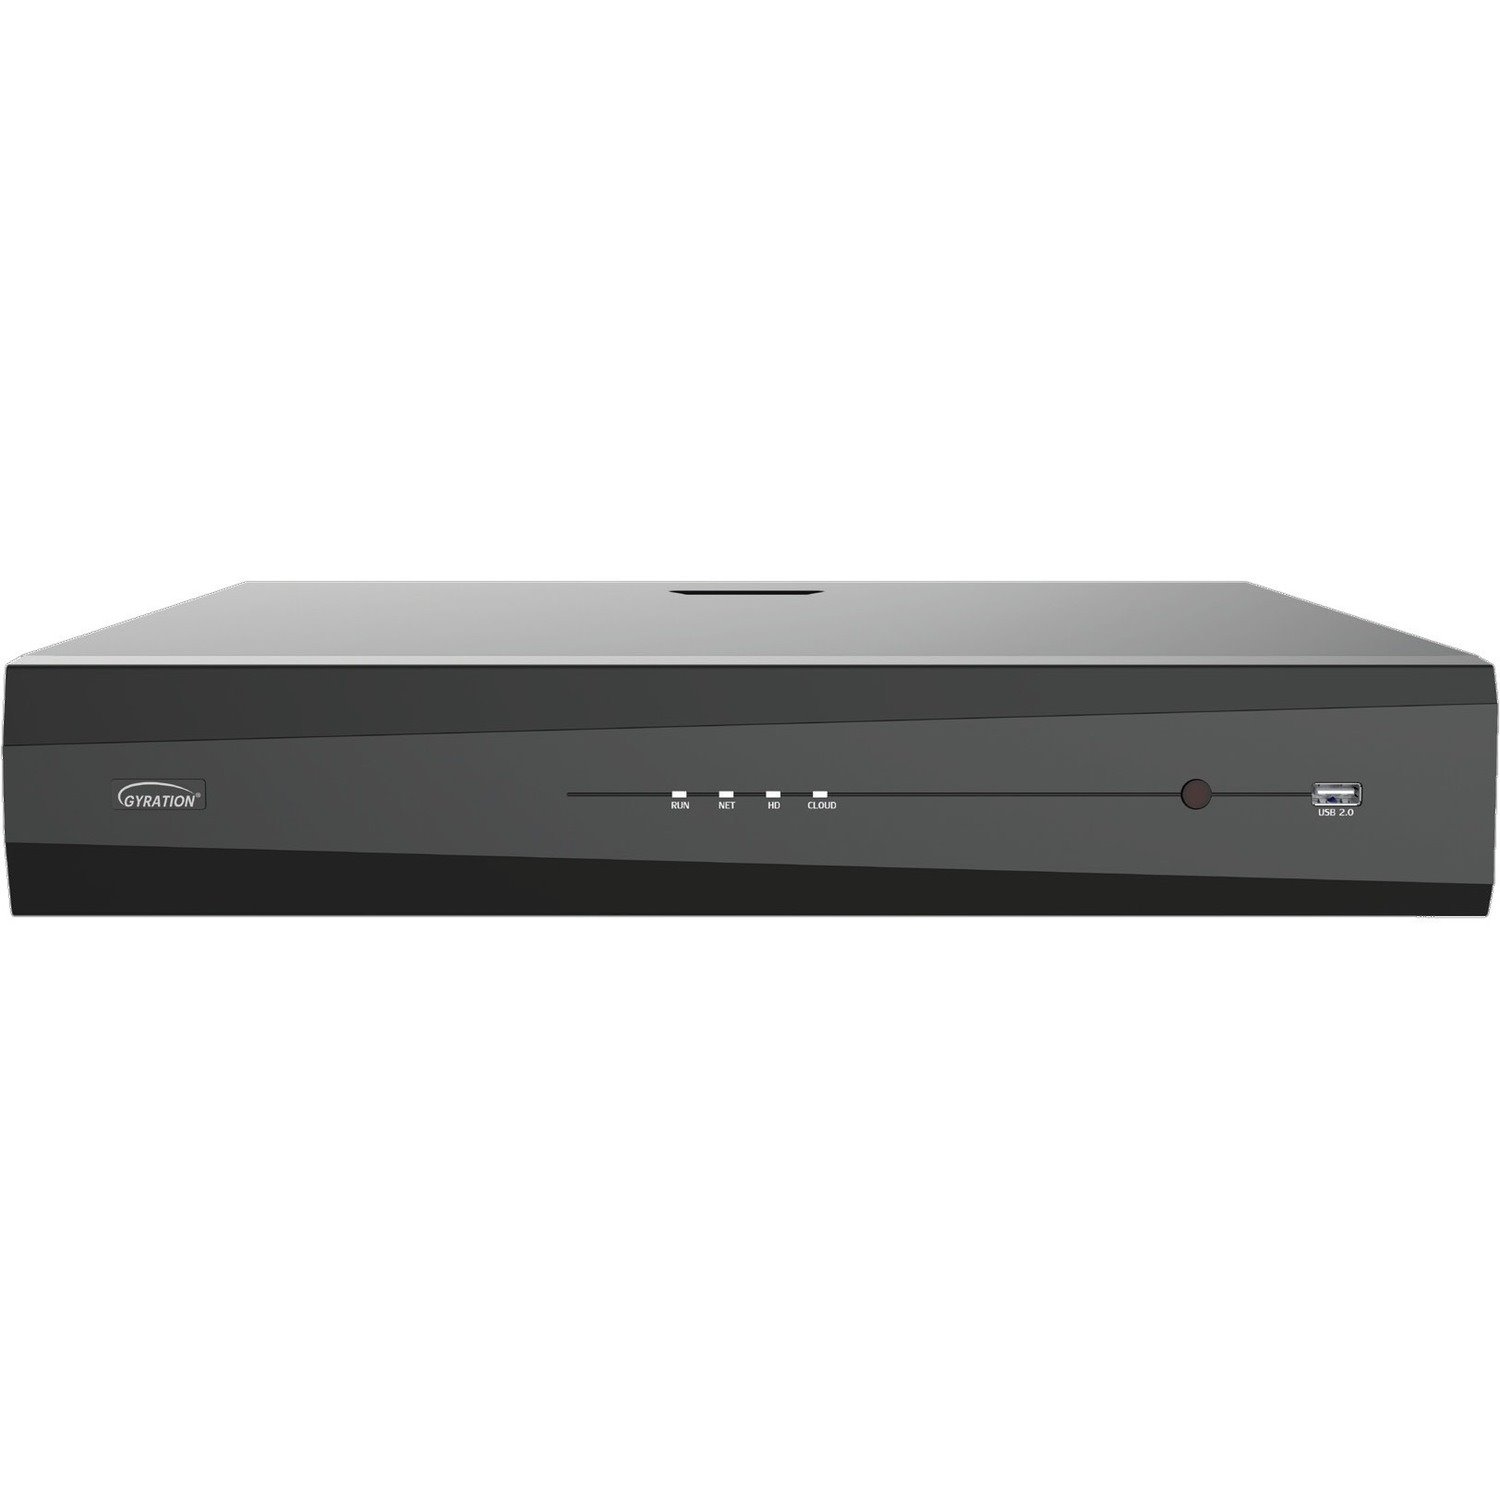 Gyration 32-Channel Network Video Recorder With PoE, TAA-Compliant